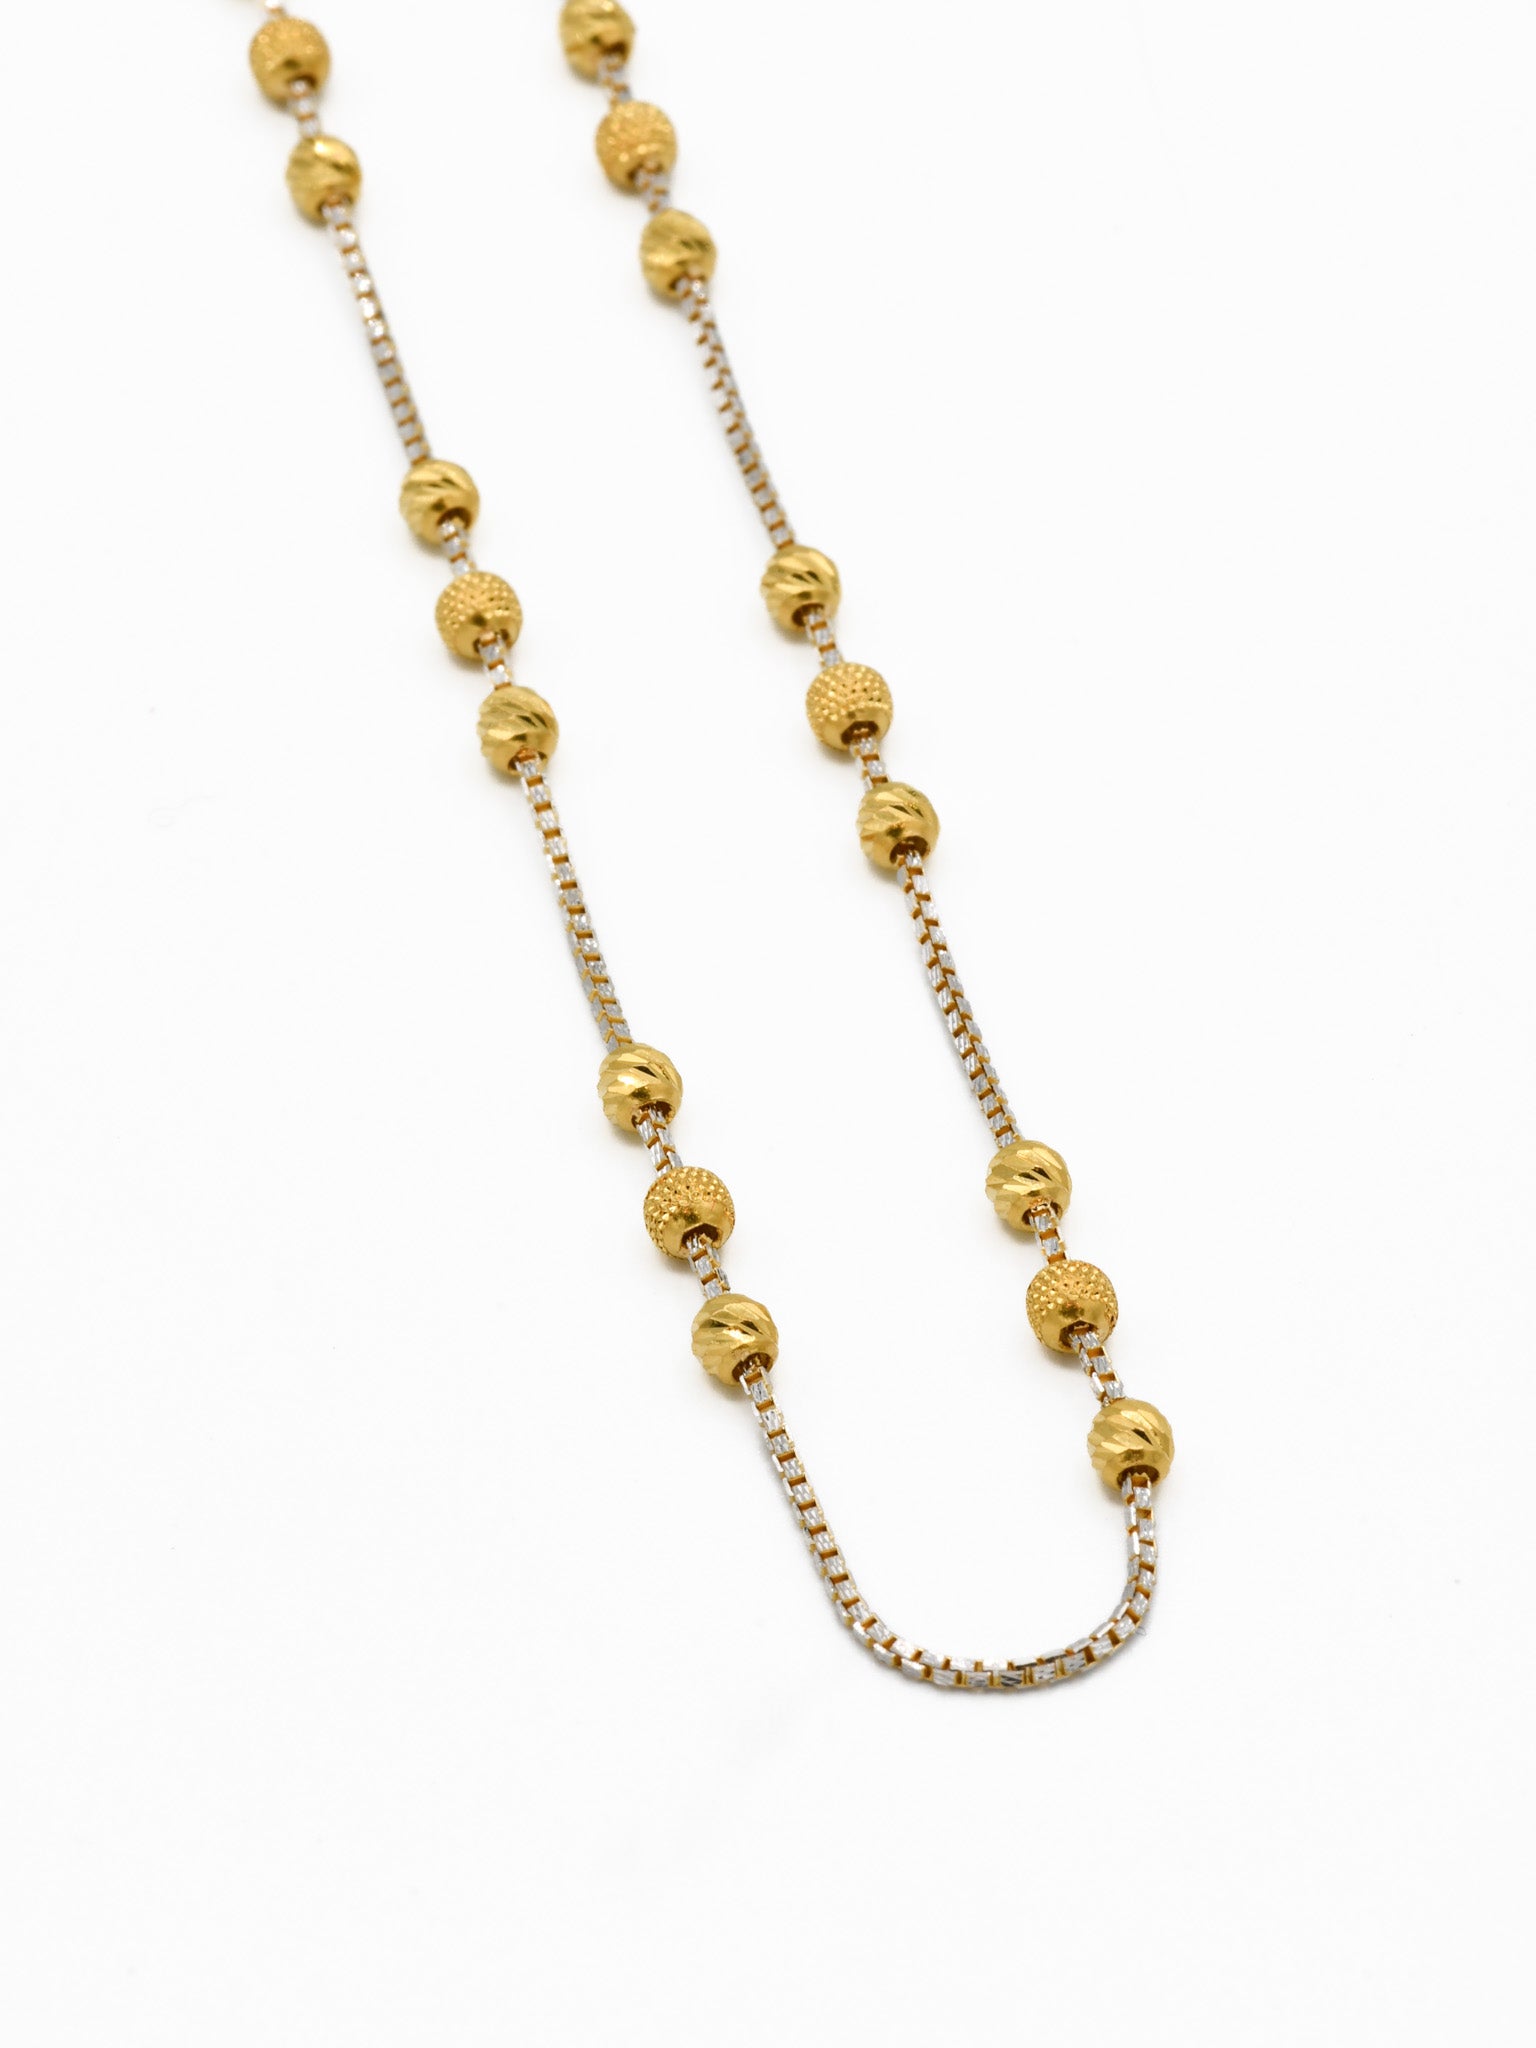 22ct Gold Two Tone Ball Fancy Chain - Roop Darshan